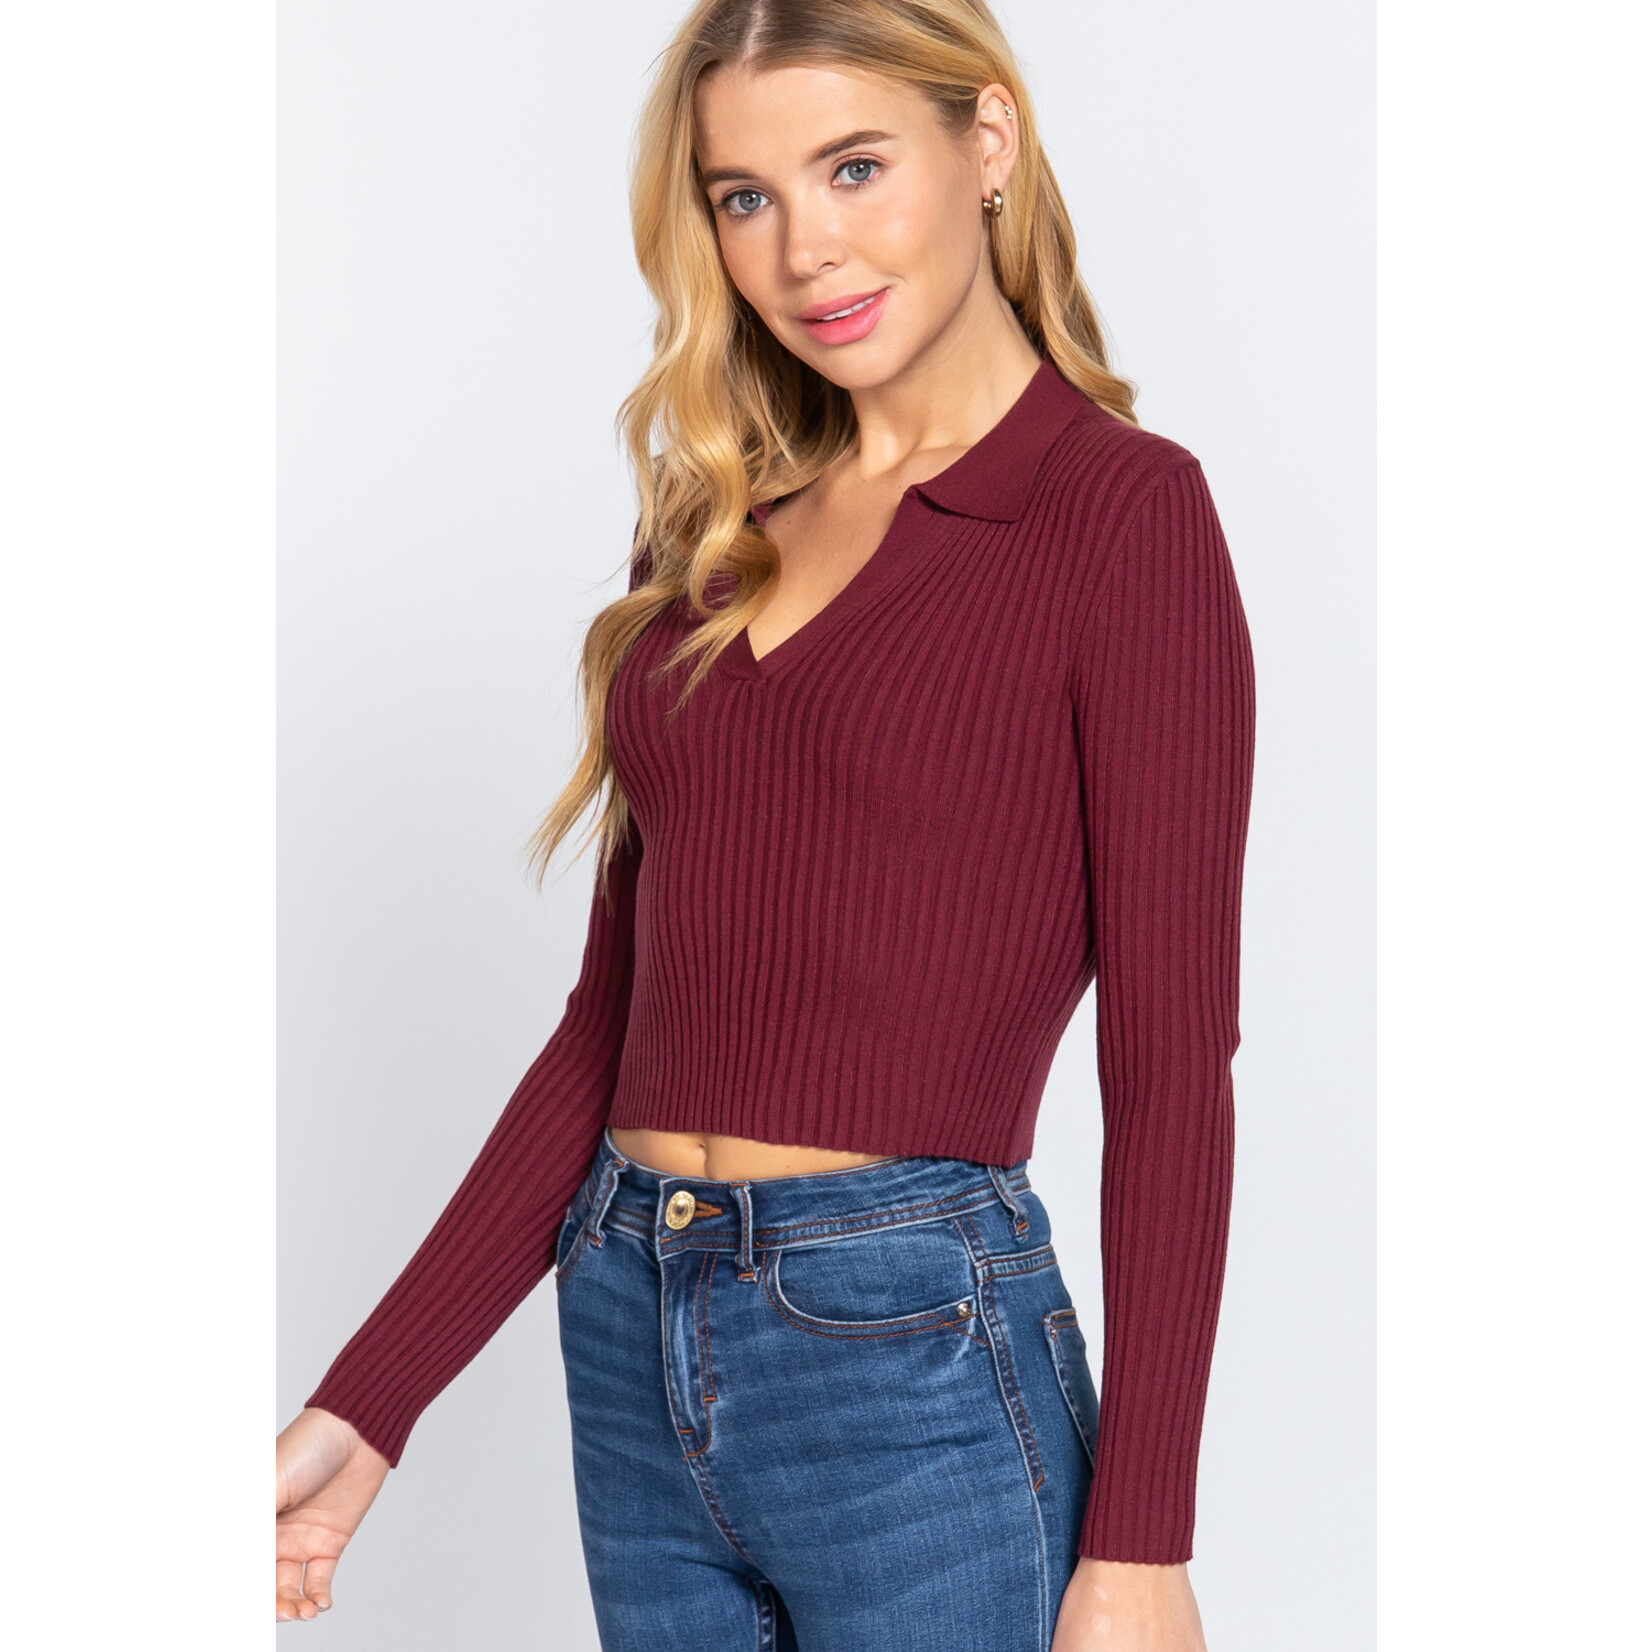 ACTIVE USA, INC. Active USA - Long Sleeve Nothced Collar Rib Sweater Top- SW13185